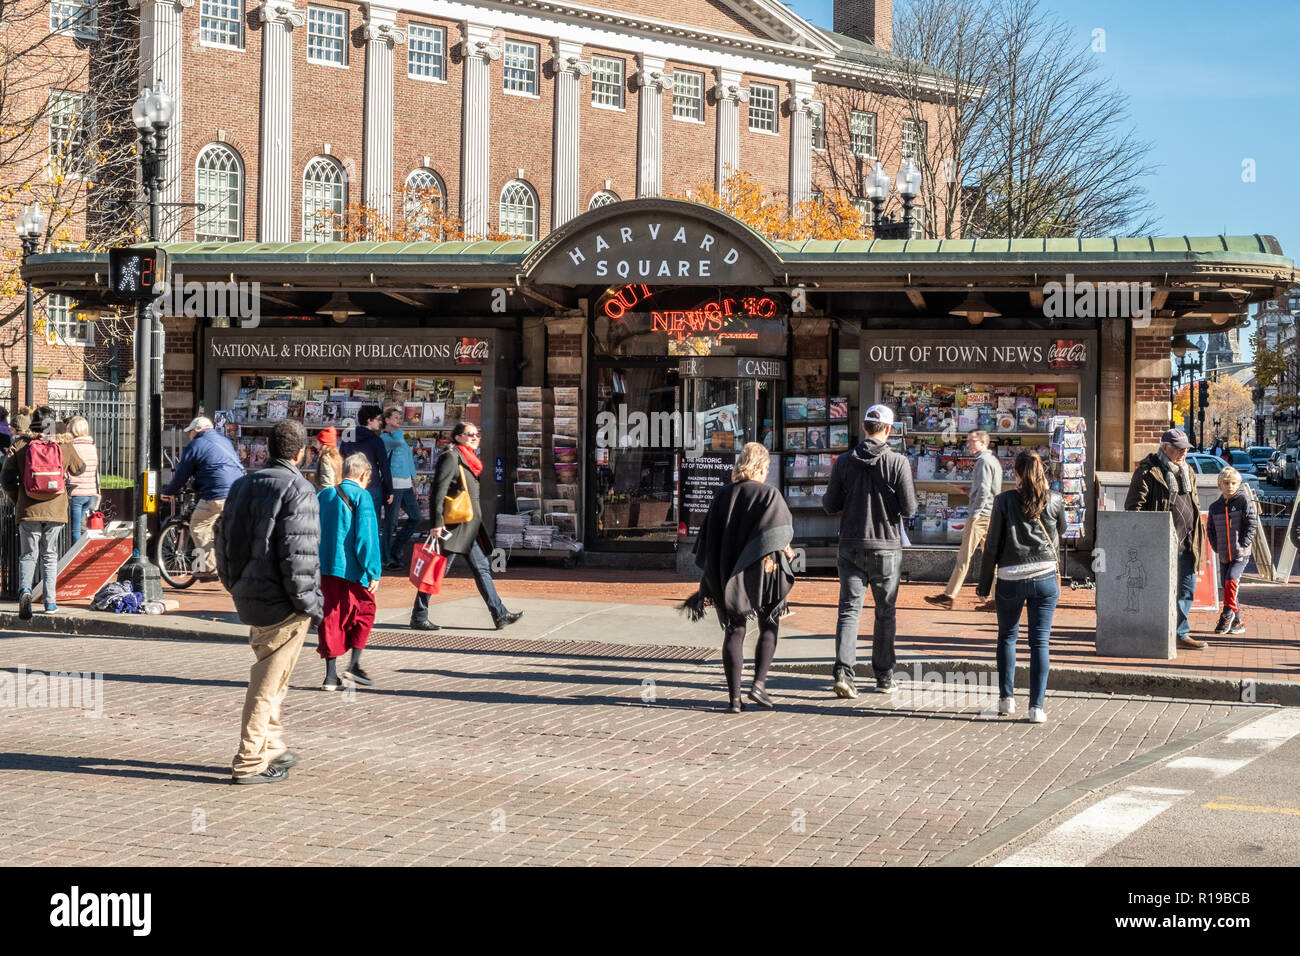 Out of Town News, Harvard Square, Cambridge, MA Stock Photo